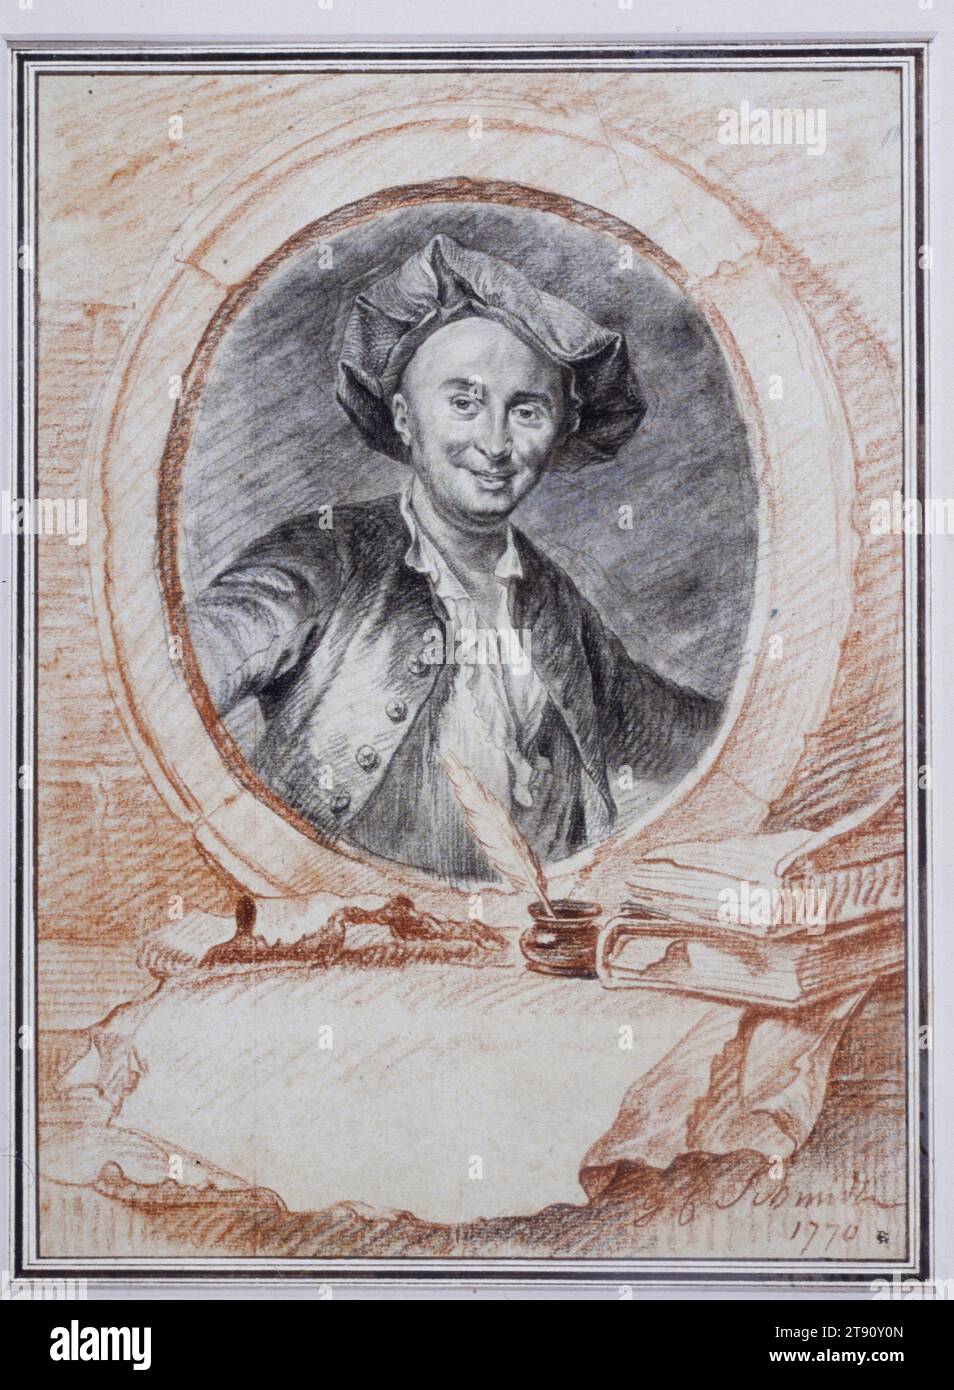 Portrait of Julien Offray de La Mettrie (1709–1751), 1770, Georg Friedrich Schmidt, German, 1712 - 1775, 12 9/16 x 9 3/16 in. (31.91 x 23.34 cm) (sheet), Sanguine and conté crayon, Germany, 18th century, A native of Berlin, Schmidt came to Paris to study printmaking with Nicolas Larmessin and became a member of the Royal Academy in 1742. He returned to Berlin in 1744 to serve as engraver to the King of Prussia and in 1757, established a school for printmakers at Saint Petersberg. The subject of Schmidt’s portrait, Julien Offray de La Mettrie (1709–1751) Stock Photo